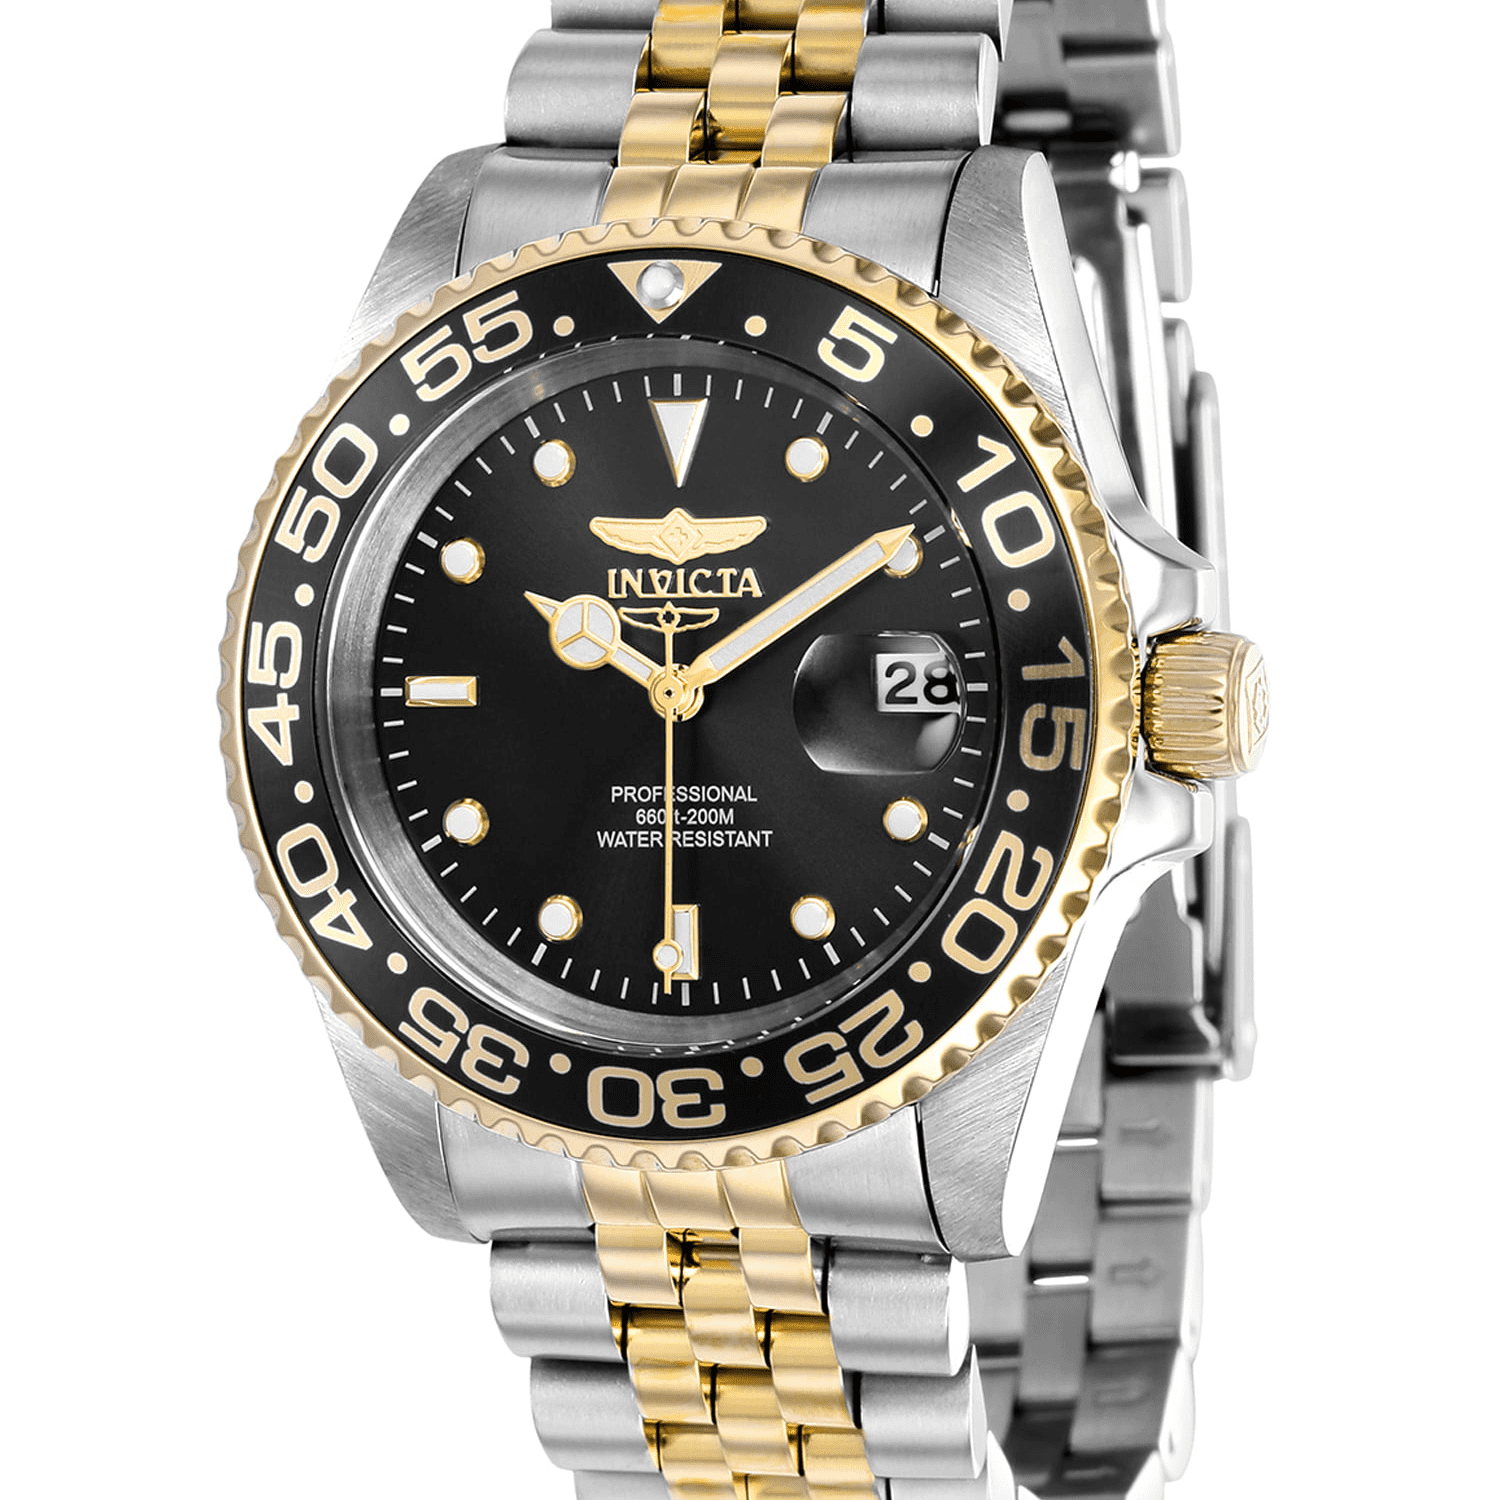 Invicta Pro Diver Lady 38mm Stainless Steel Black dial Quartz Watch